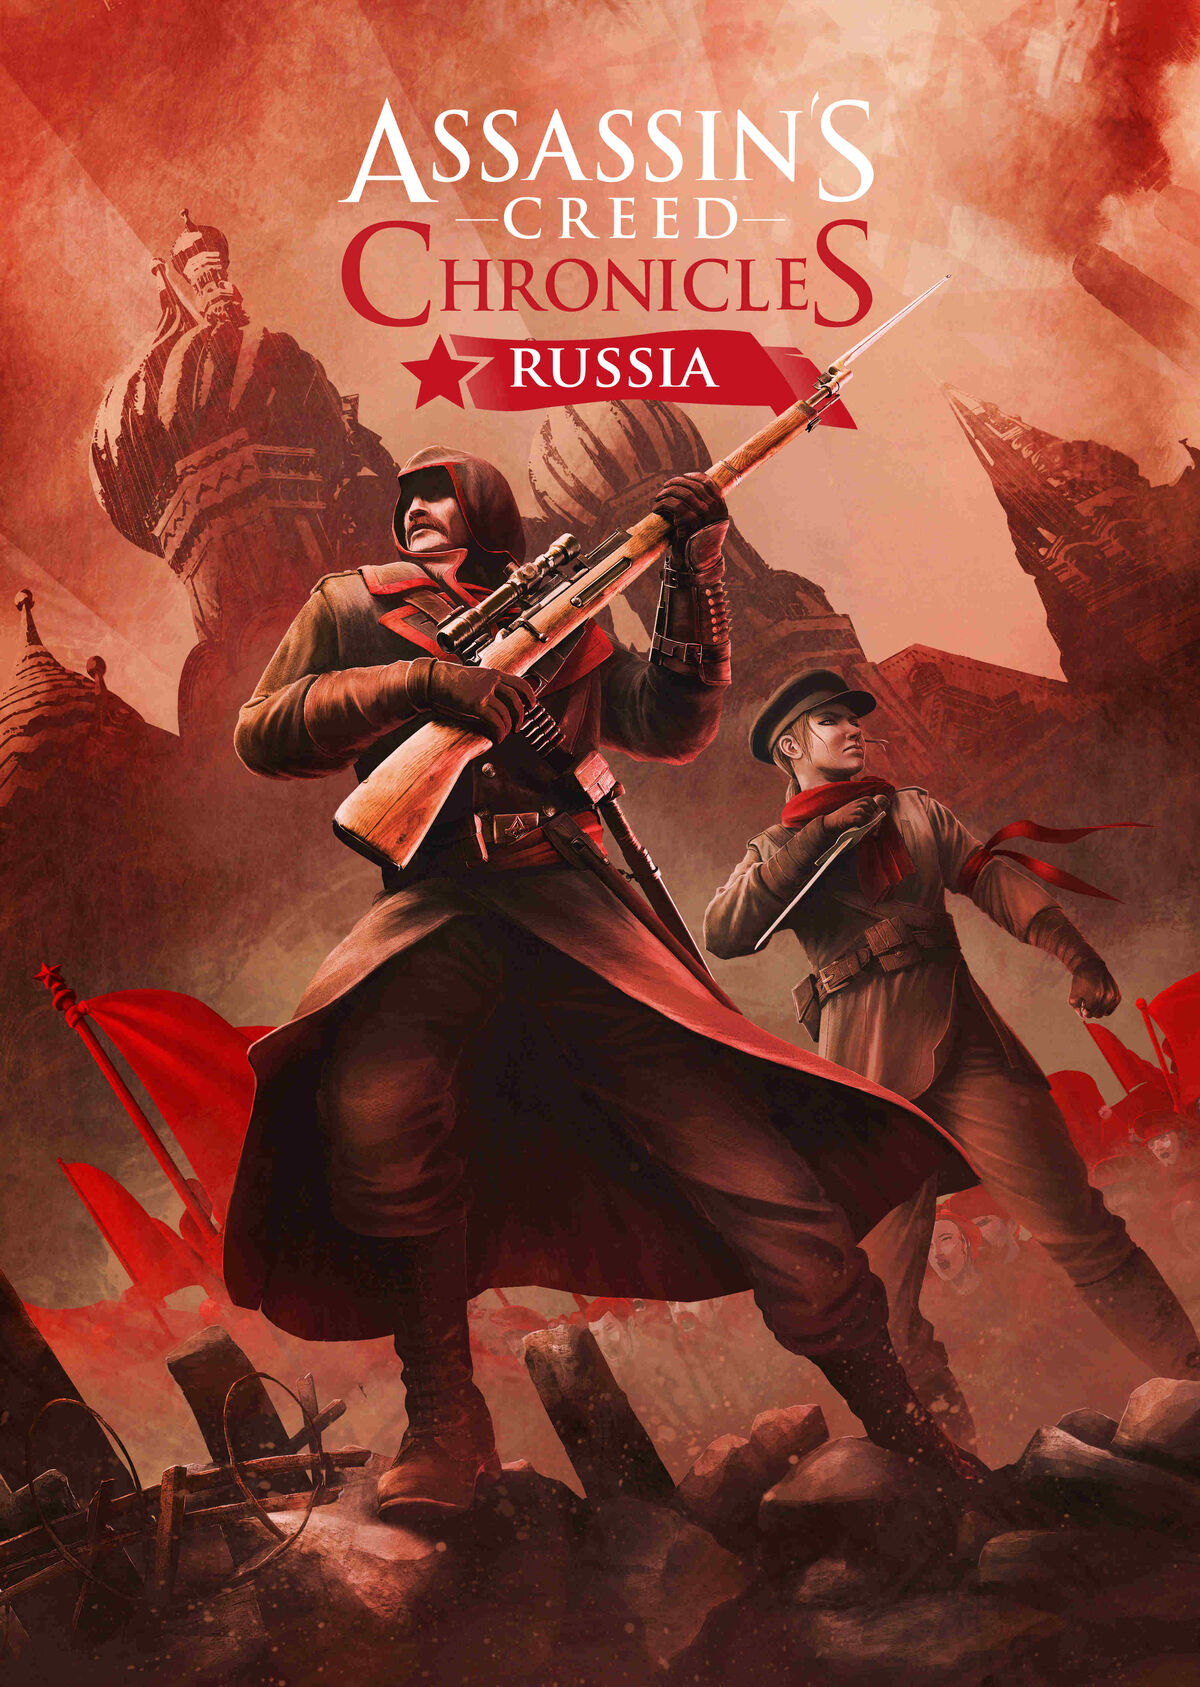 Assassin's Creed Chronicles - Wikipedia